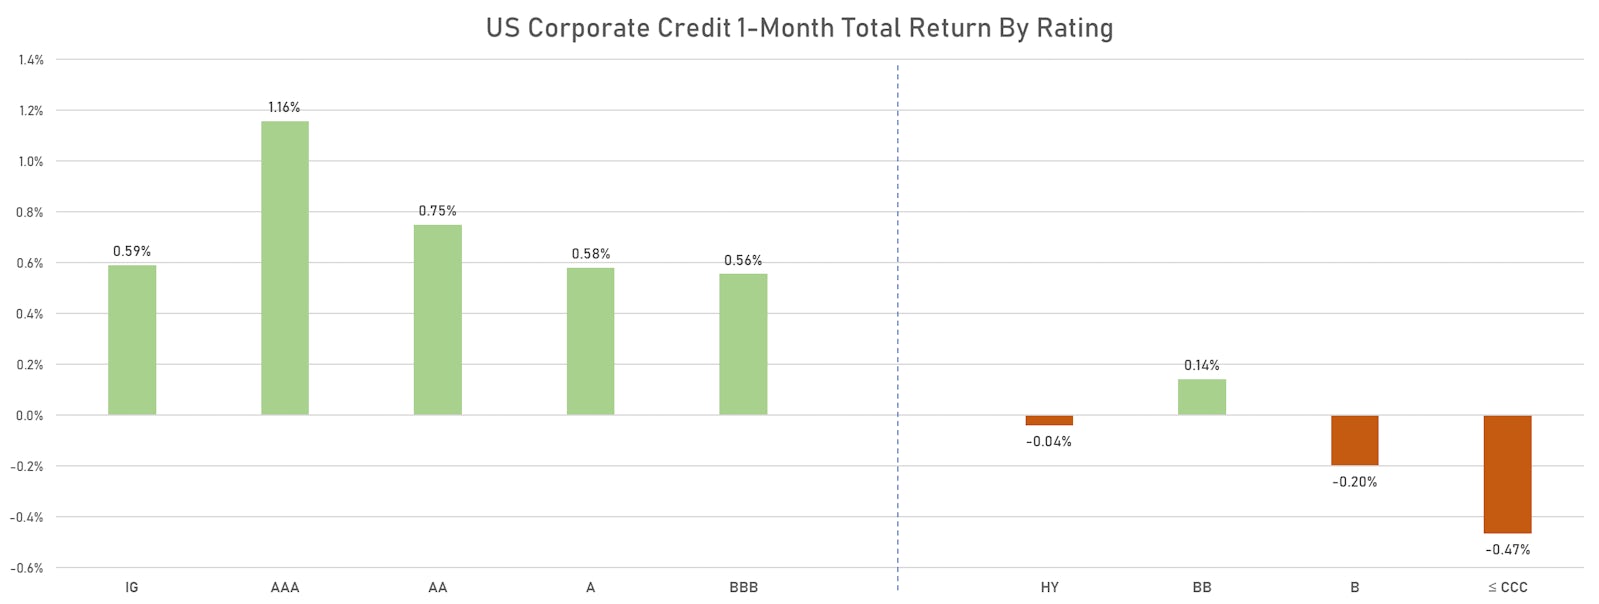 US Corporate Cash Indices 1-Month Total Returns By Credit Rating | Sources: ϕpost, FactSet data